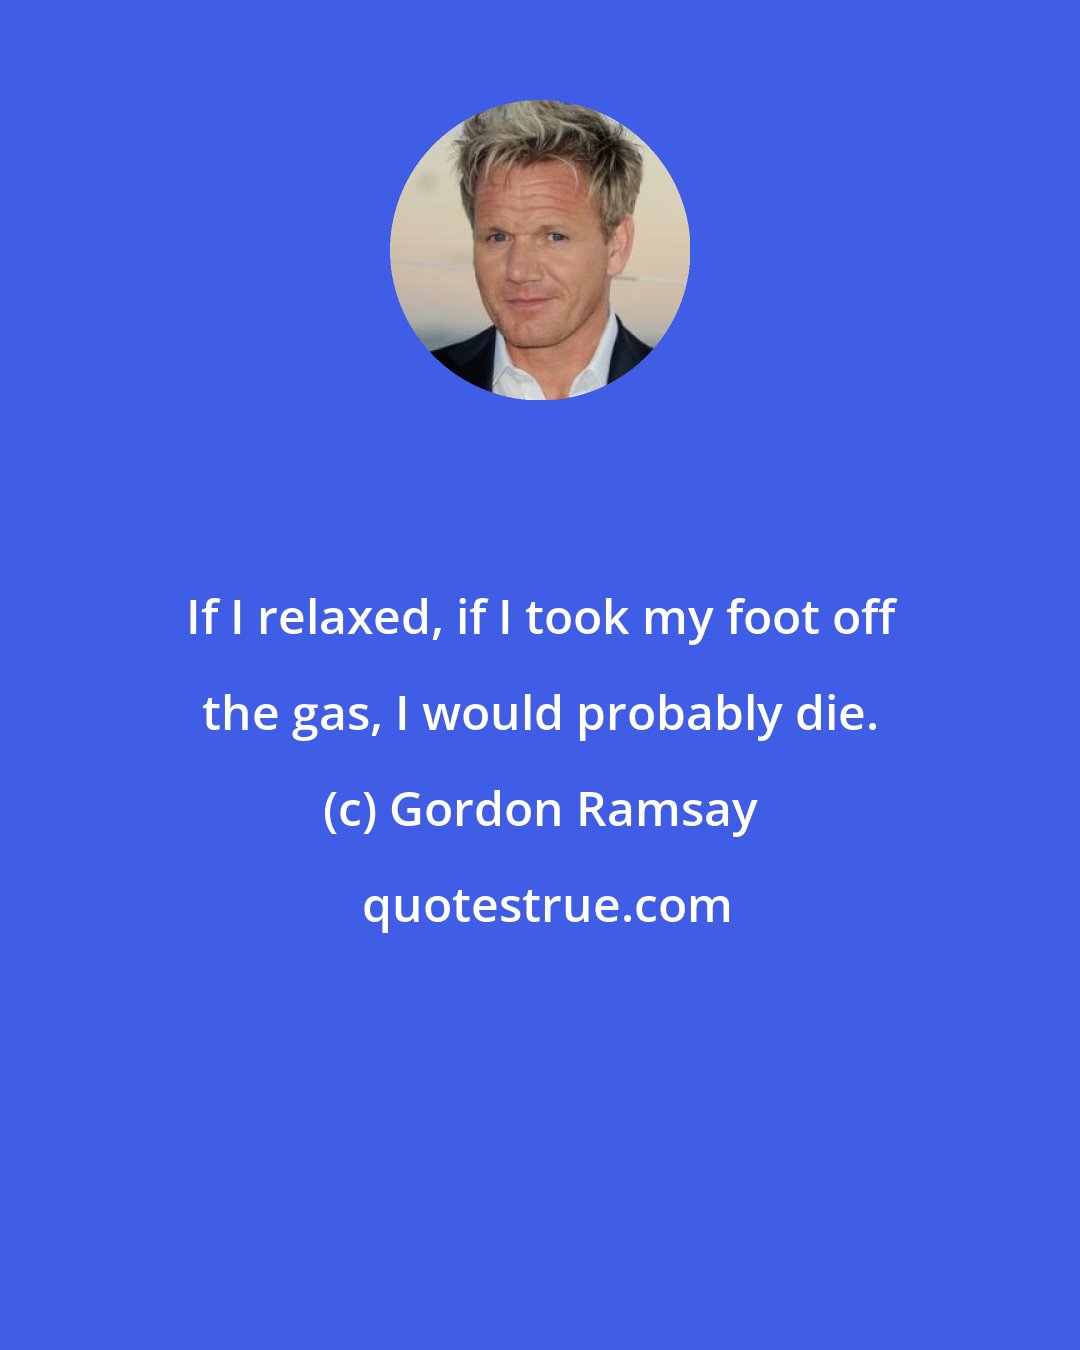 Gordon Ramsay: If I relaxed, if I took my foot off the gas, I would probably die.